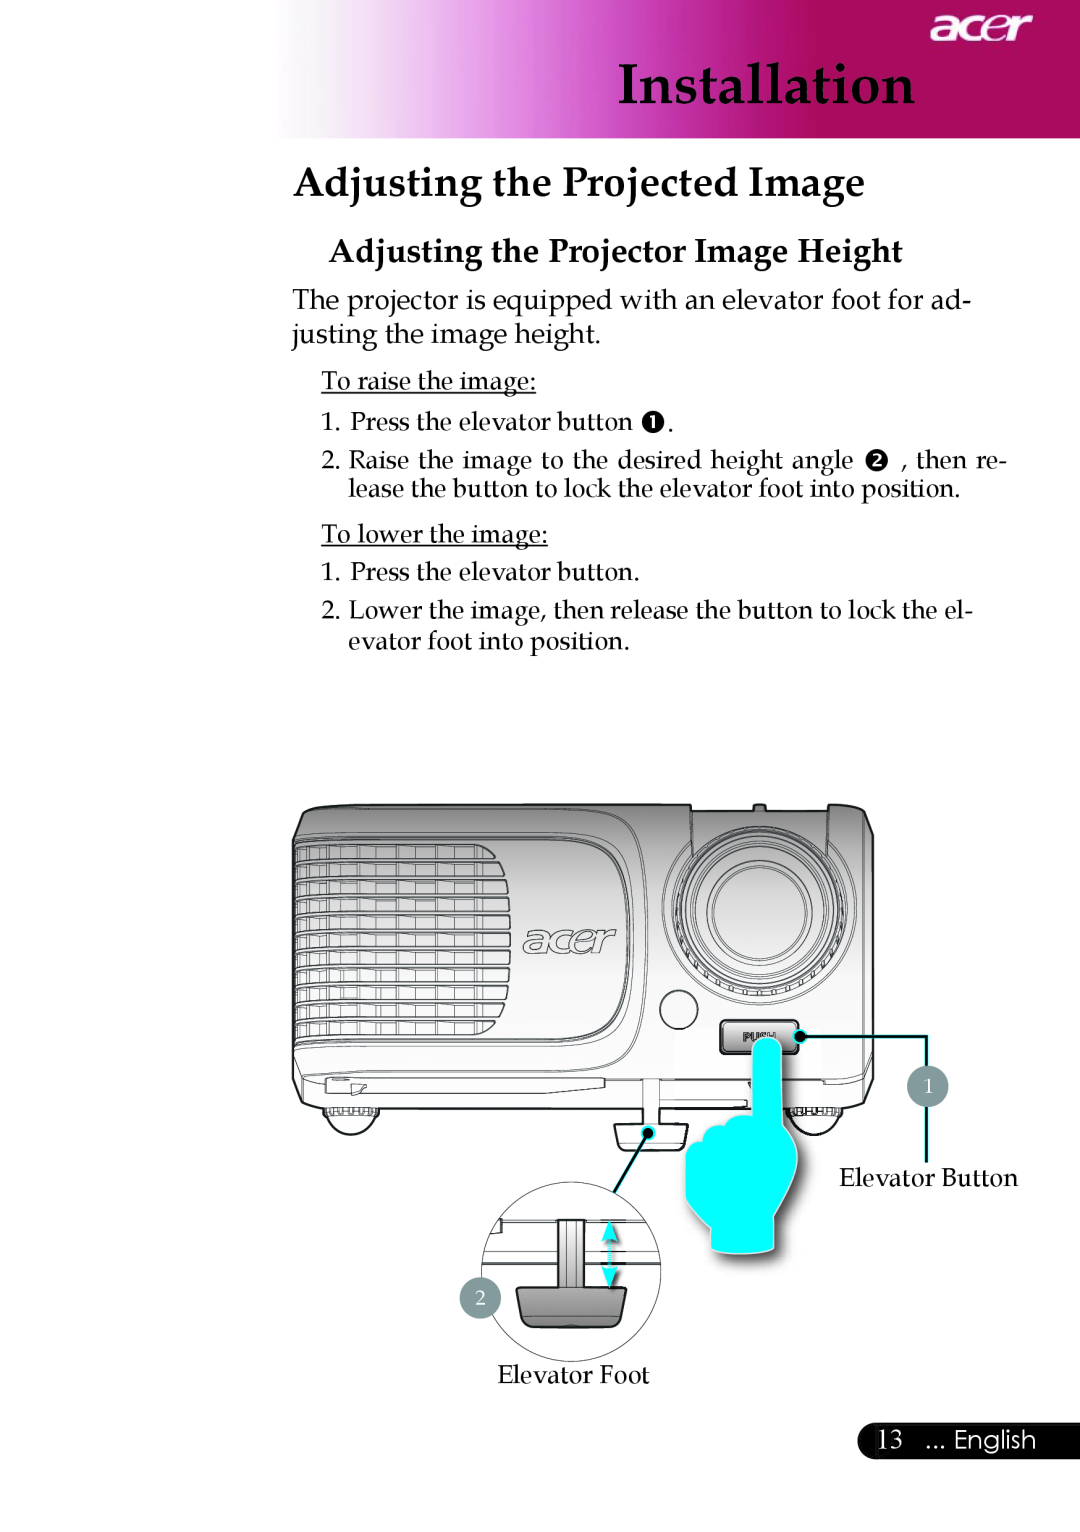 Acer XD1250, XD1150D manual Adjusting the Projected Image, Adjusting the Projector Image Height, English, Installation 